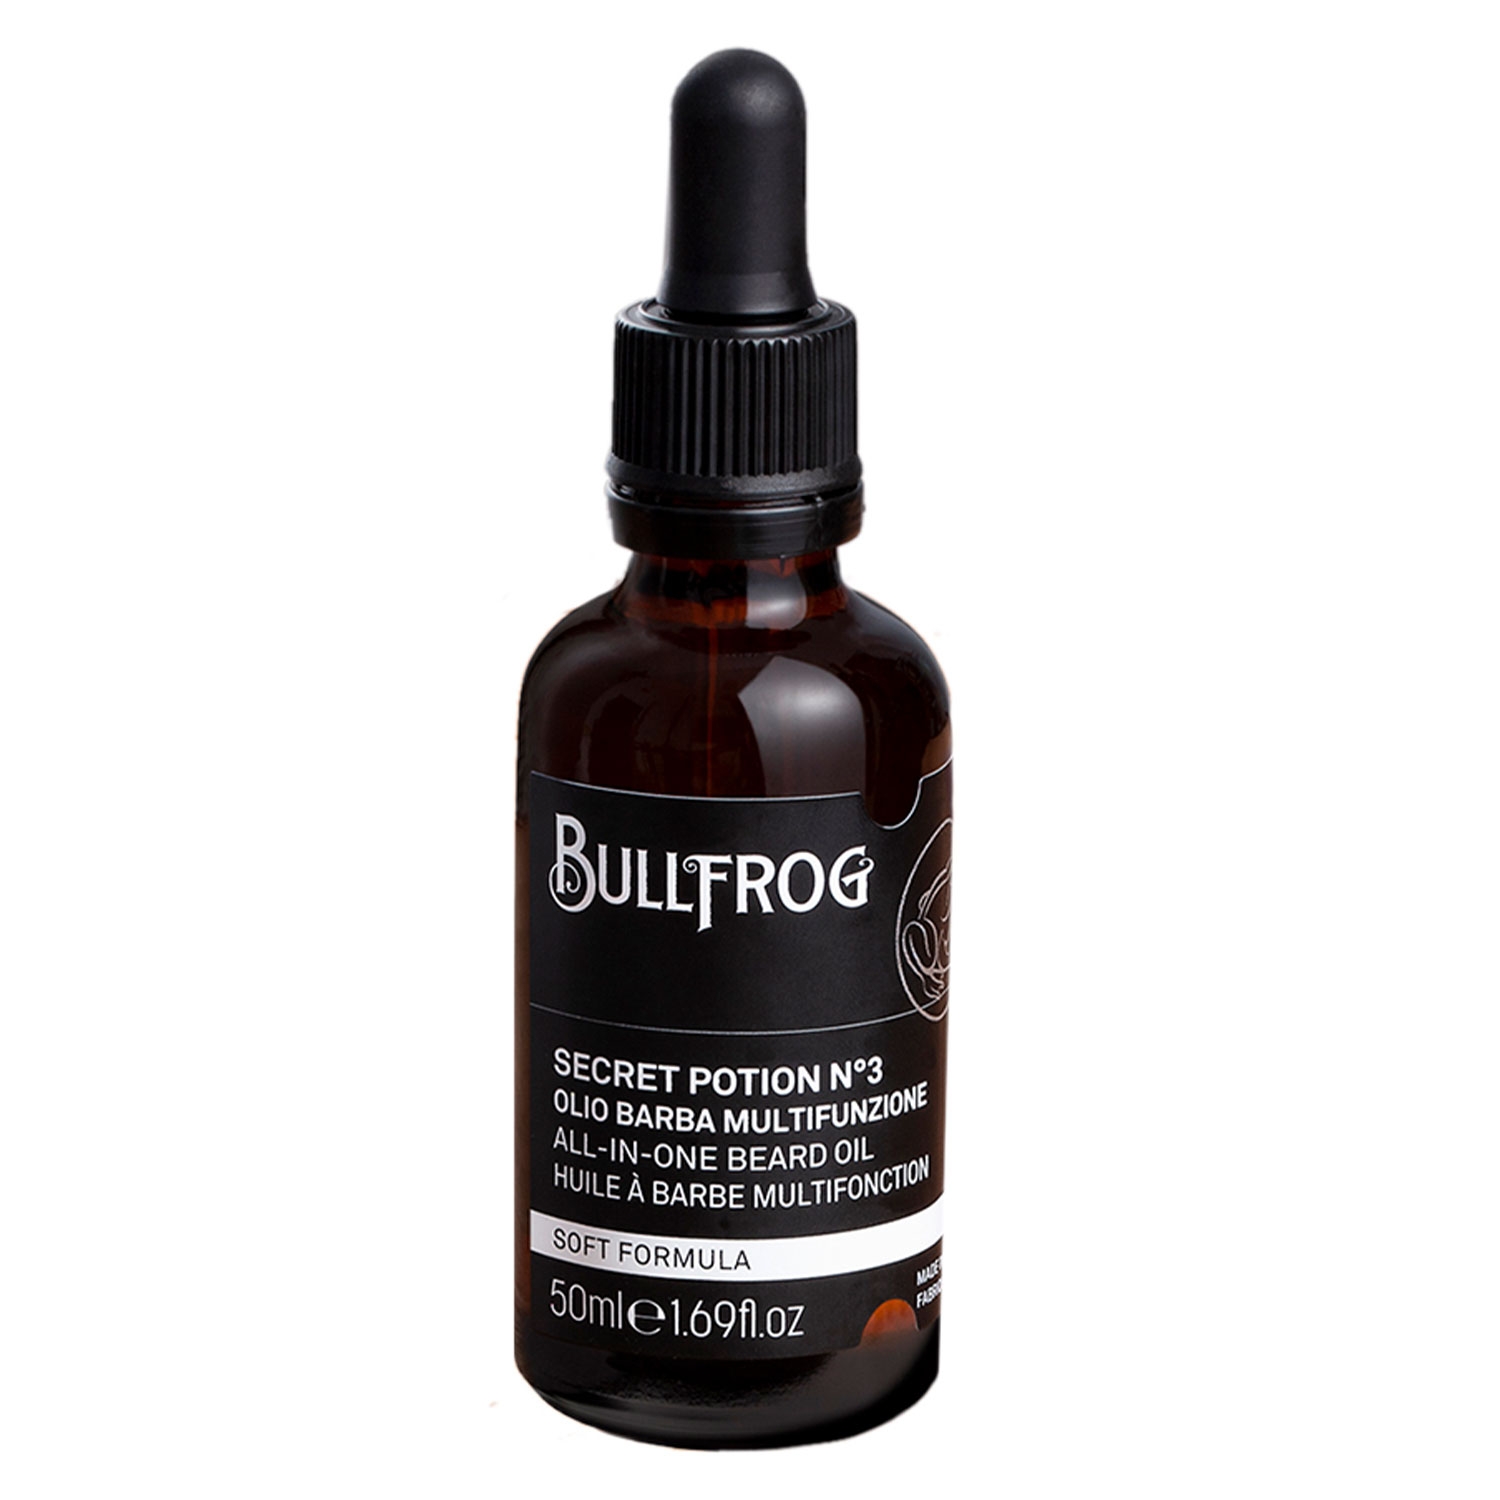 Product image from BULLFROG - All-in-One Beard Oil Secret Potion N°3